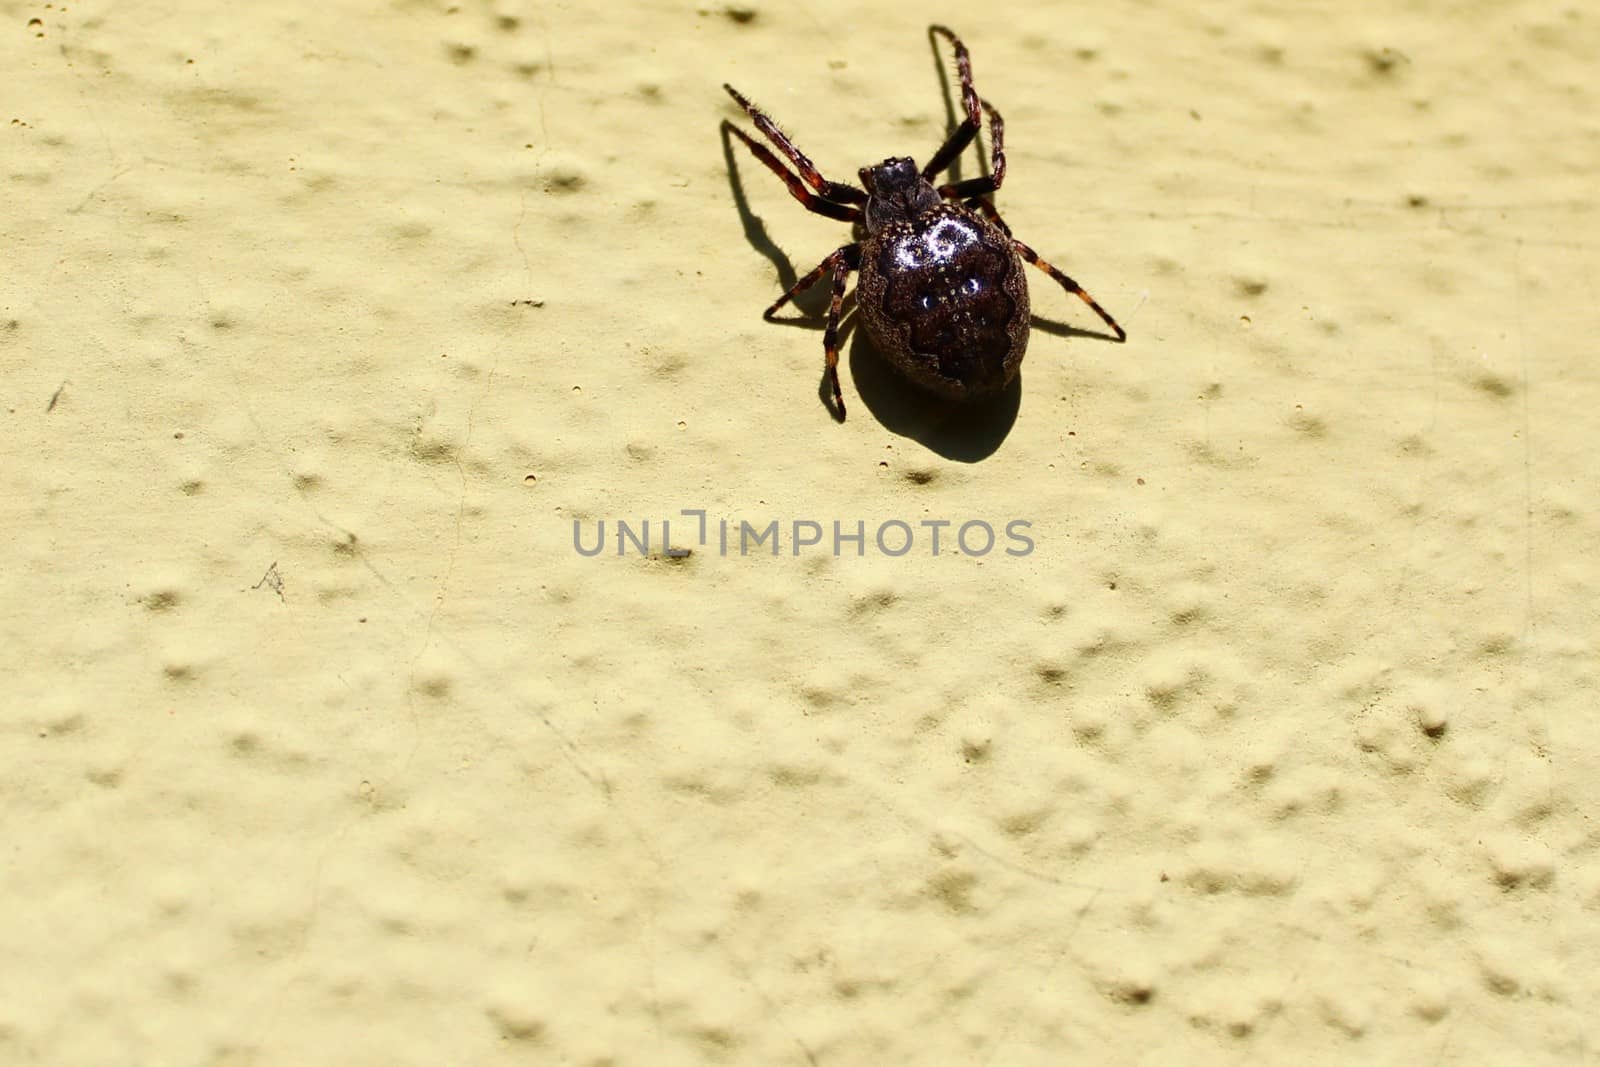 The picture shows walnut orb-weaver spider on the wall.